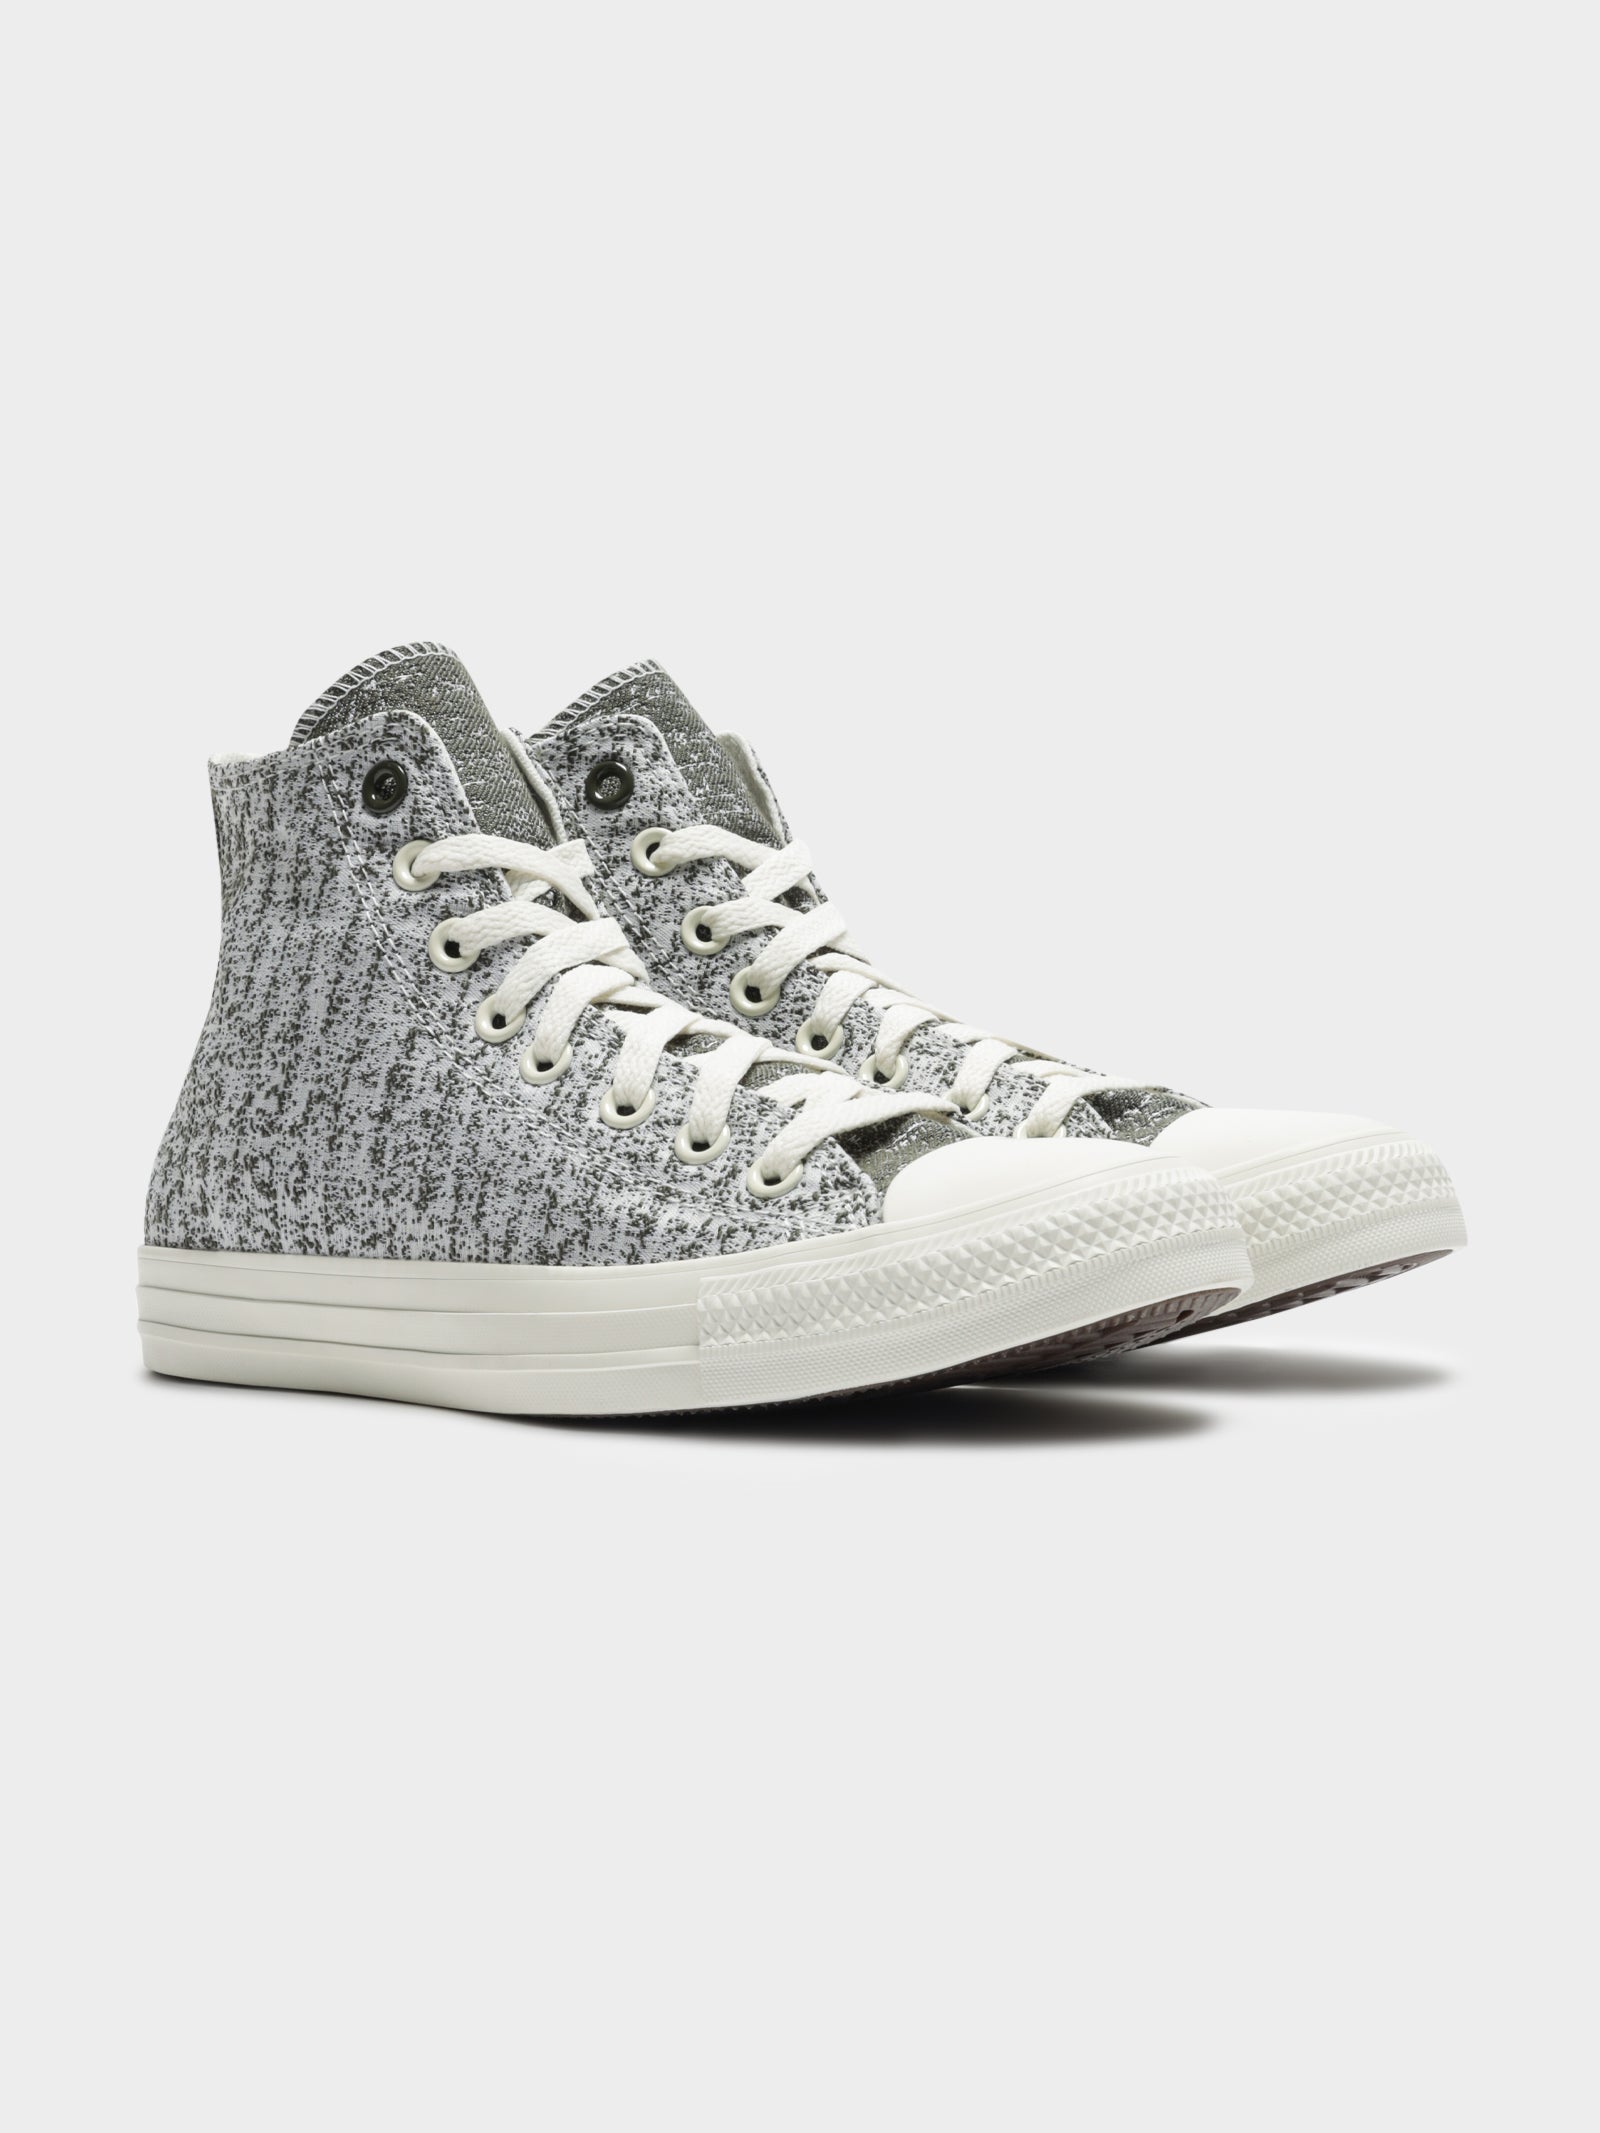 Unisex Chuck Taylor All Star Recycled Poly Jacquard Sneakers in Black & White